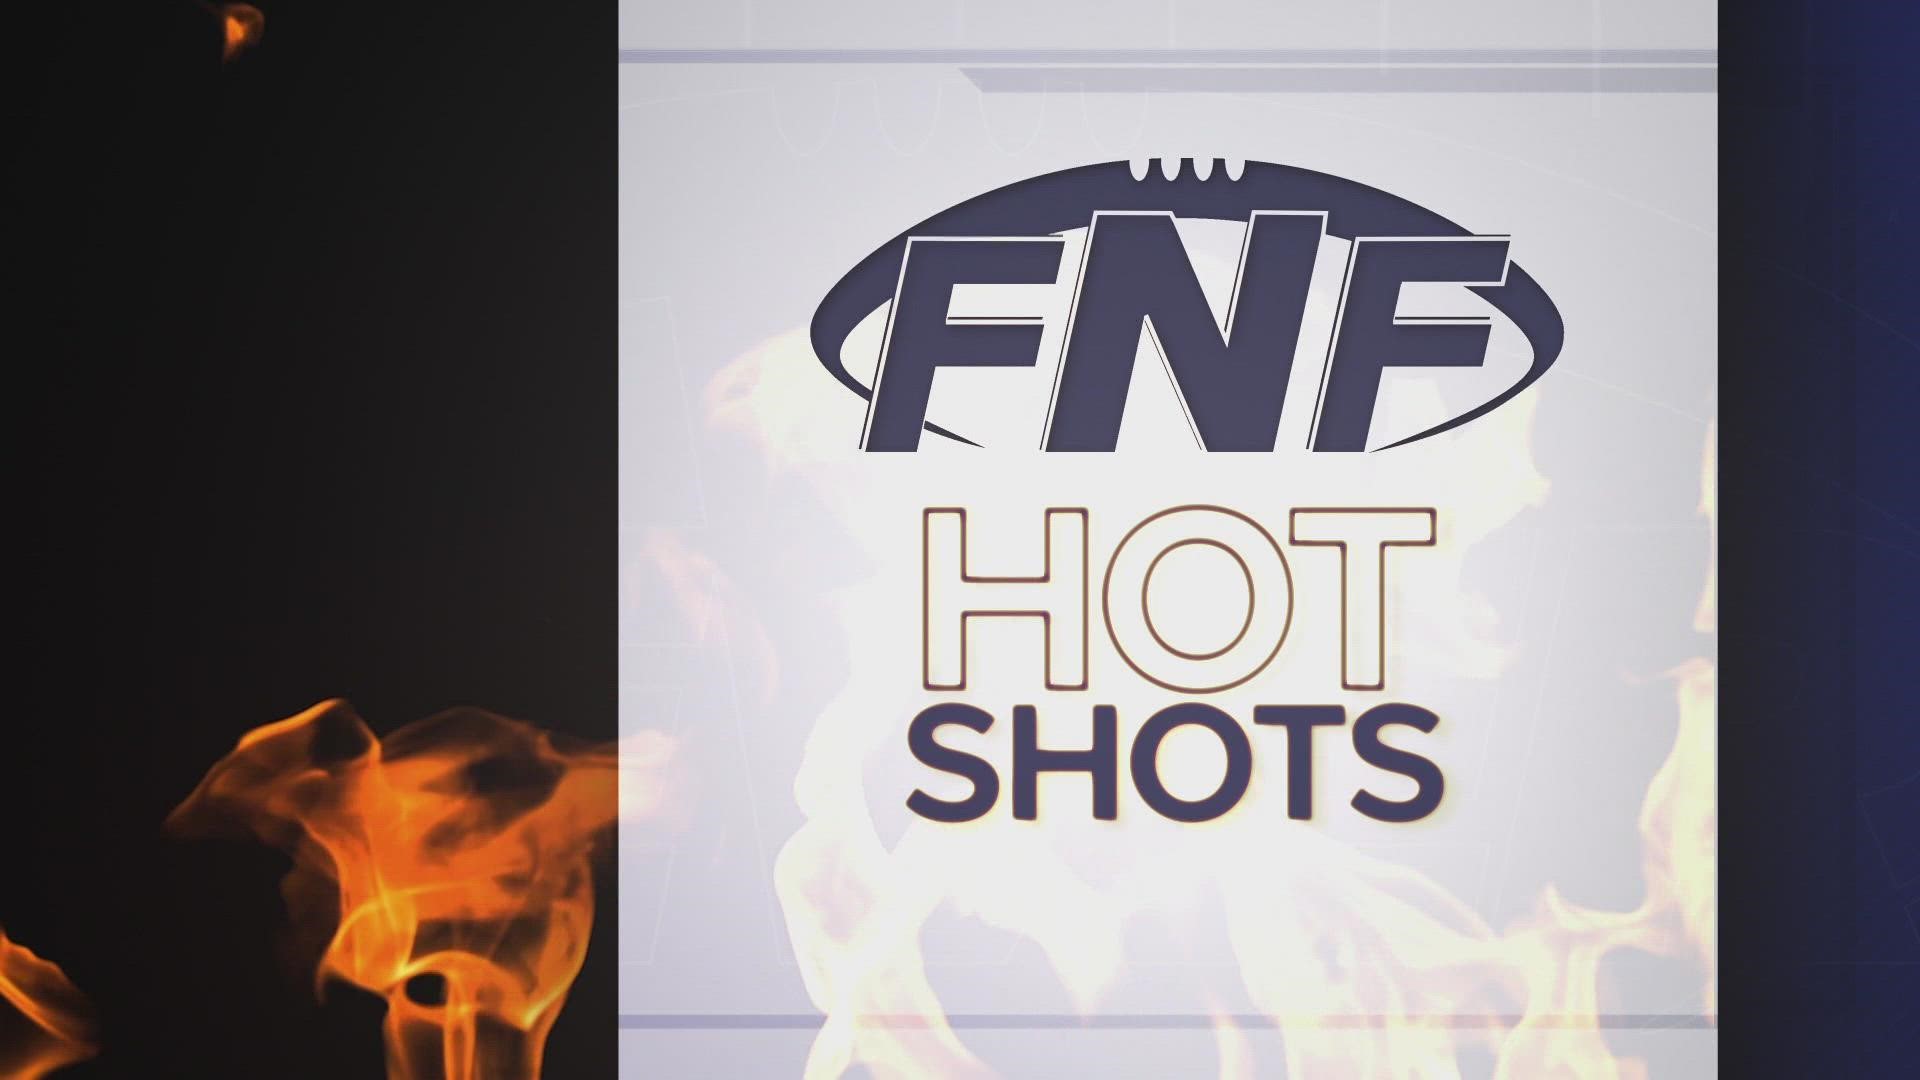 Hot Shots Plays of the Week for Week 3 of Friday Night Fever!